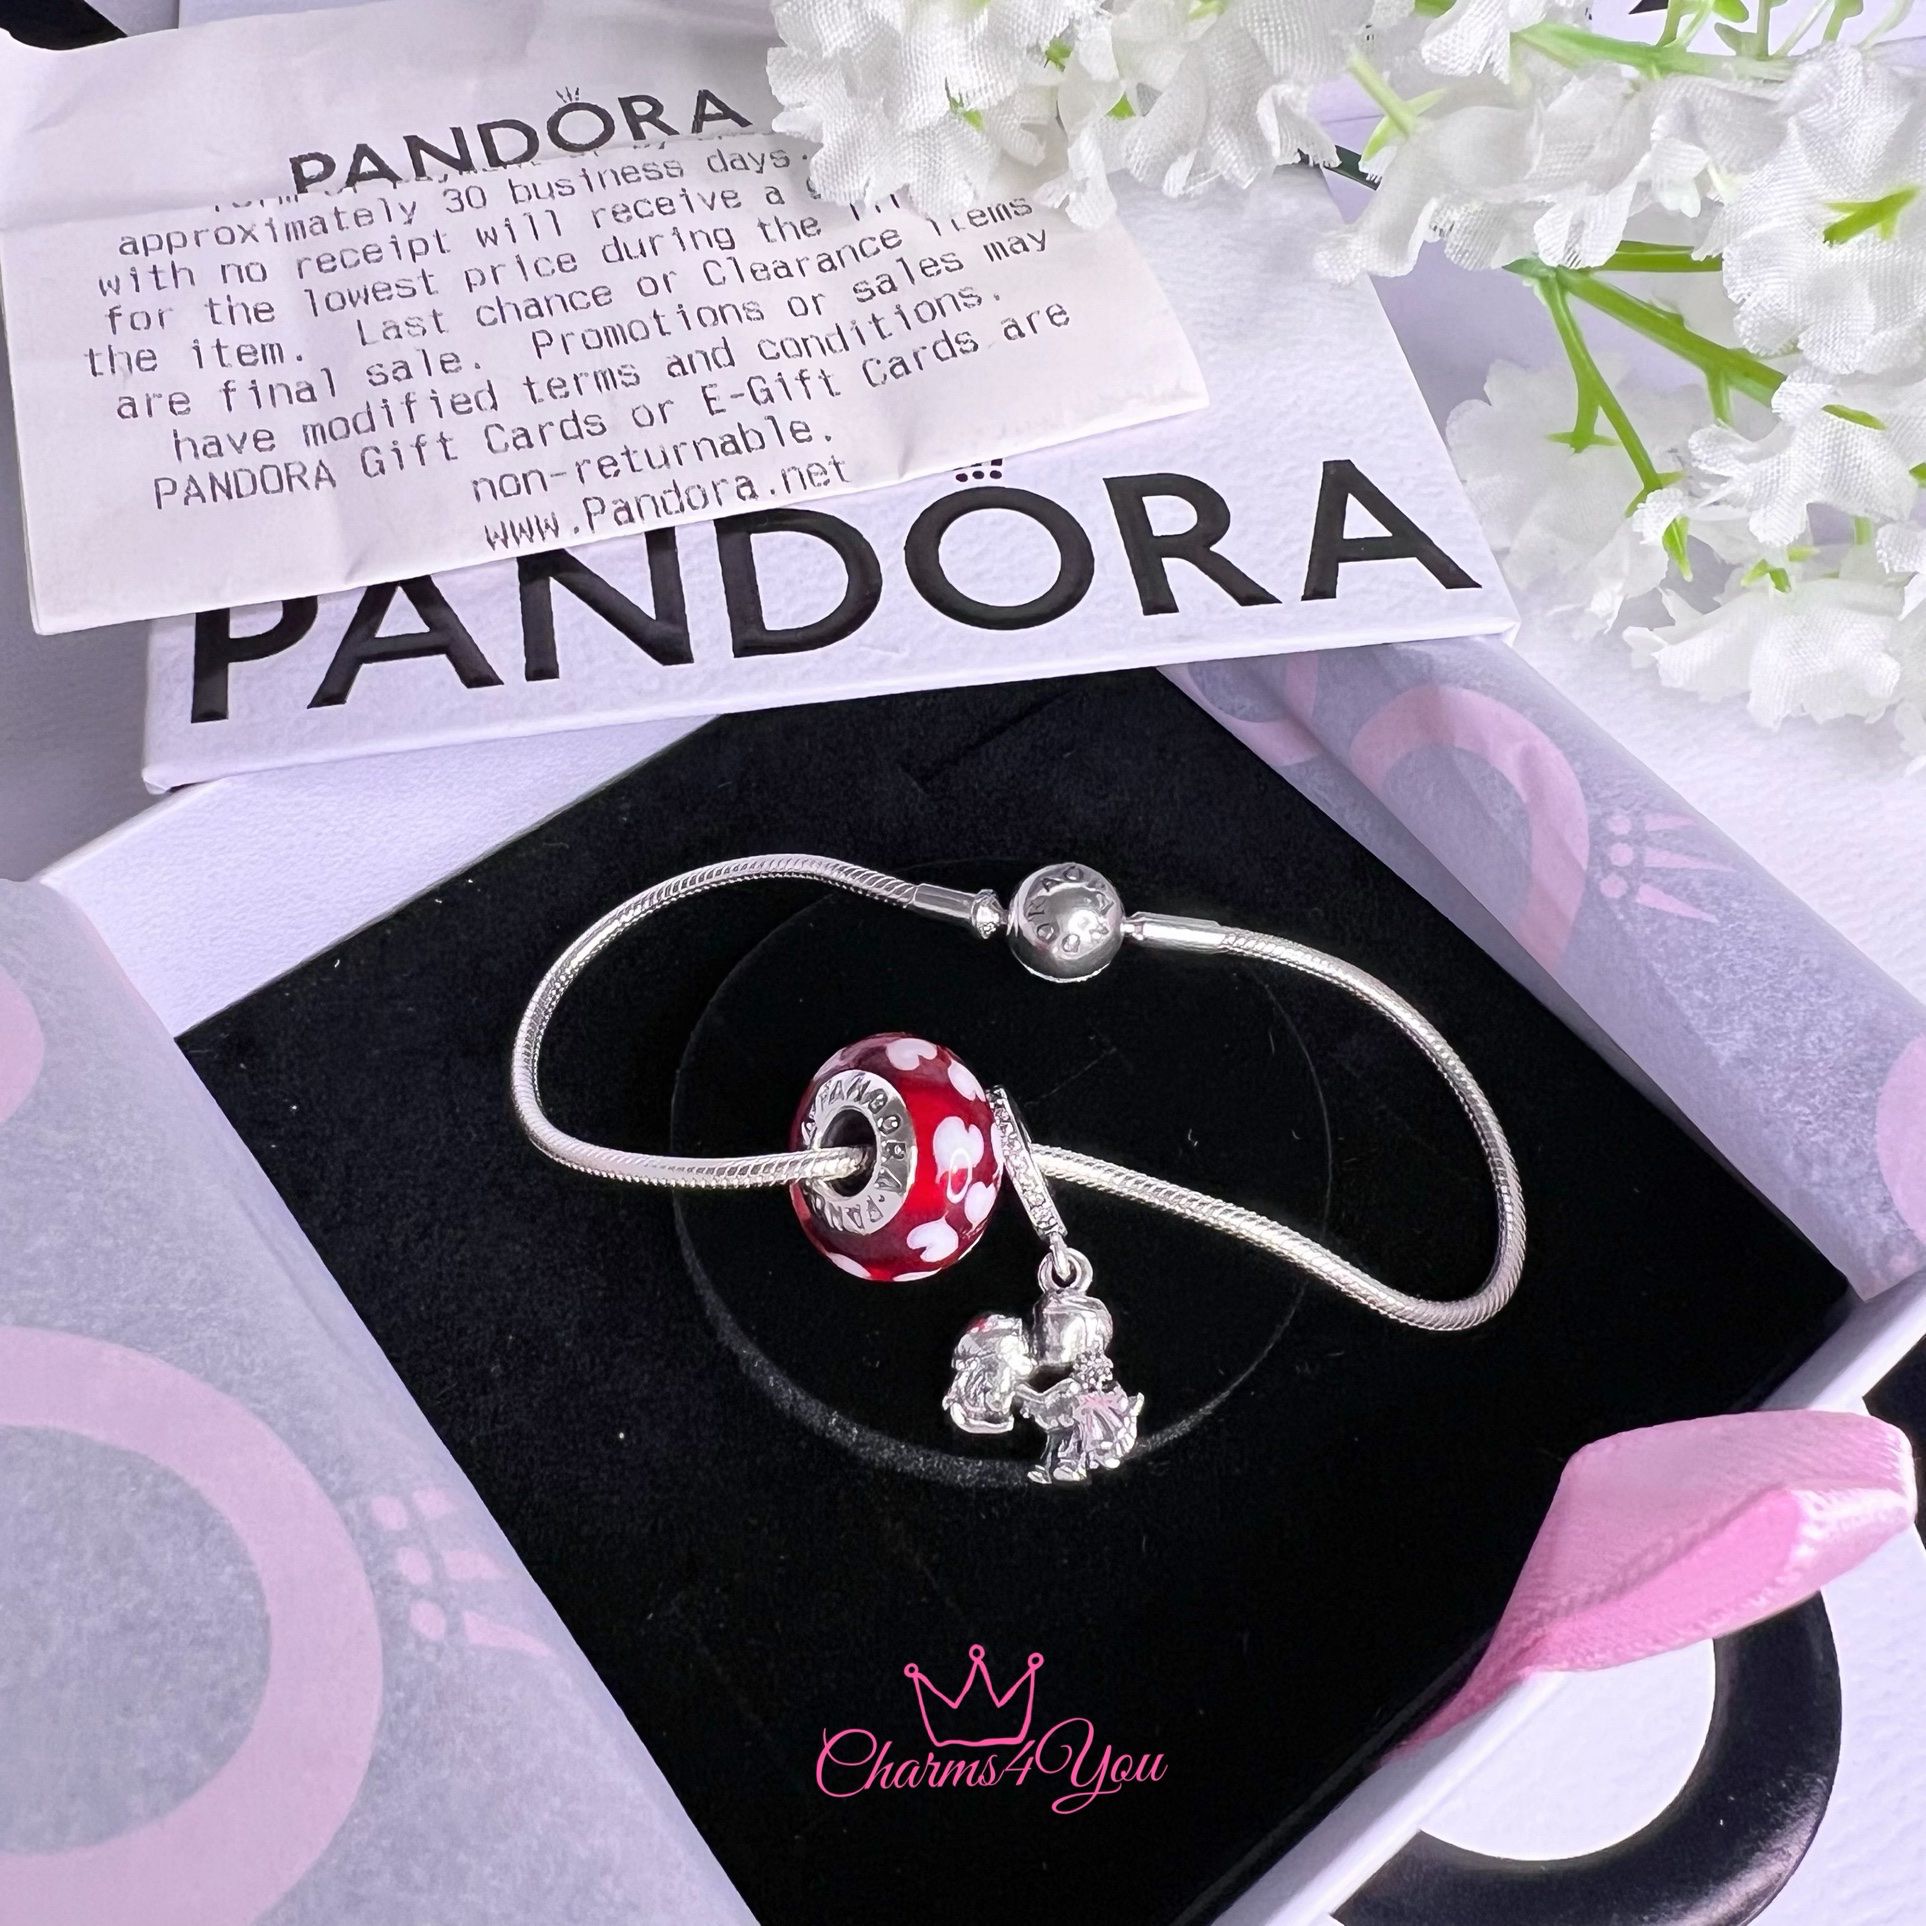 PANDORA bracelet with purchase ticket included.